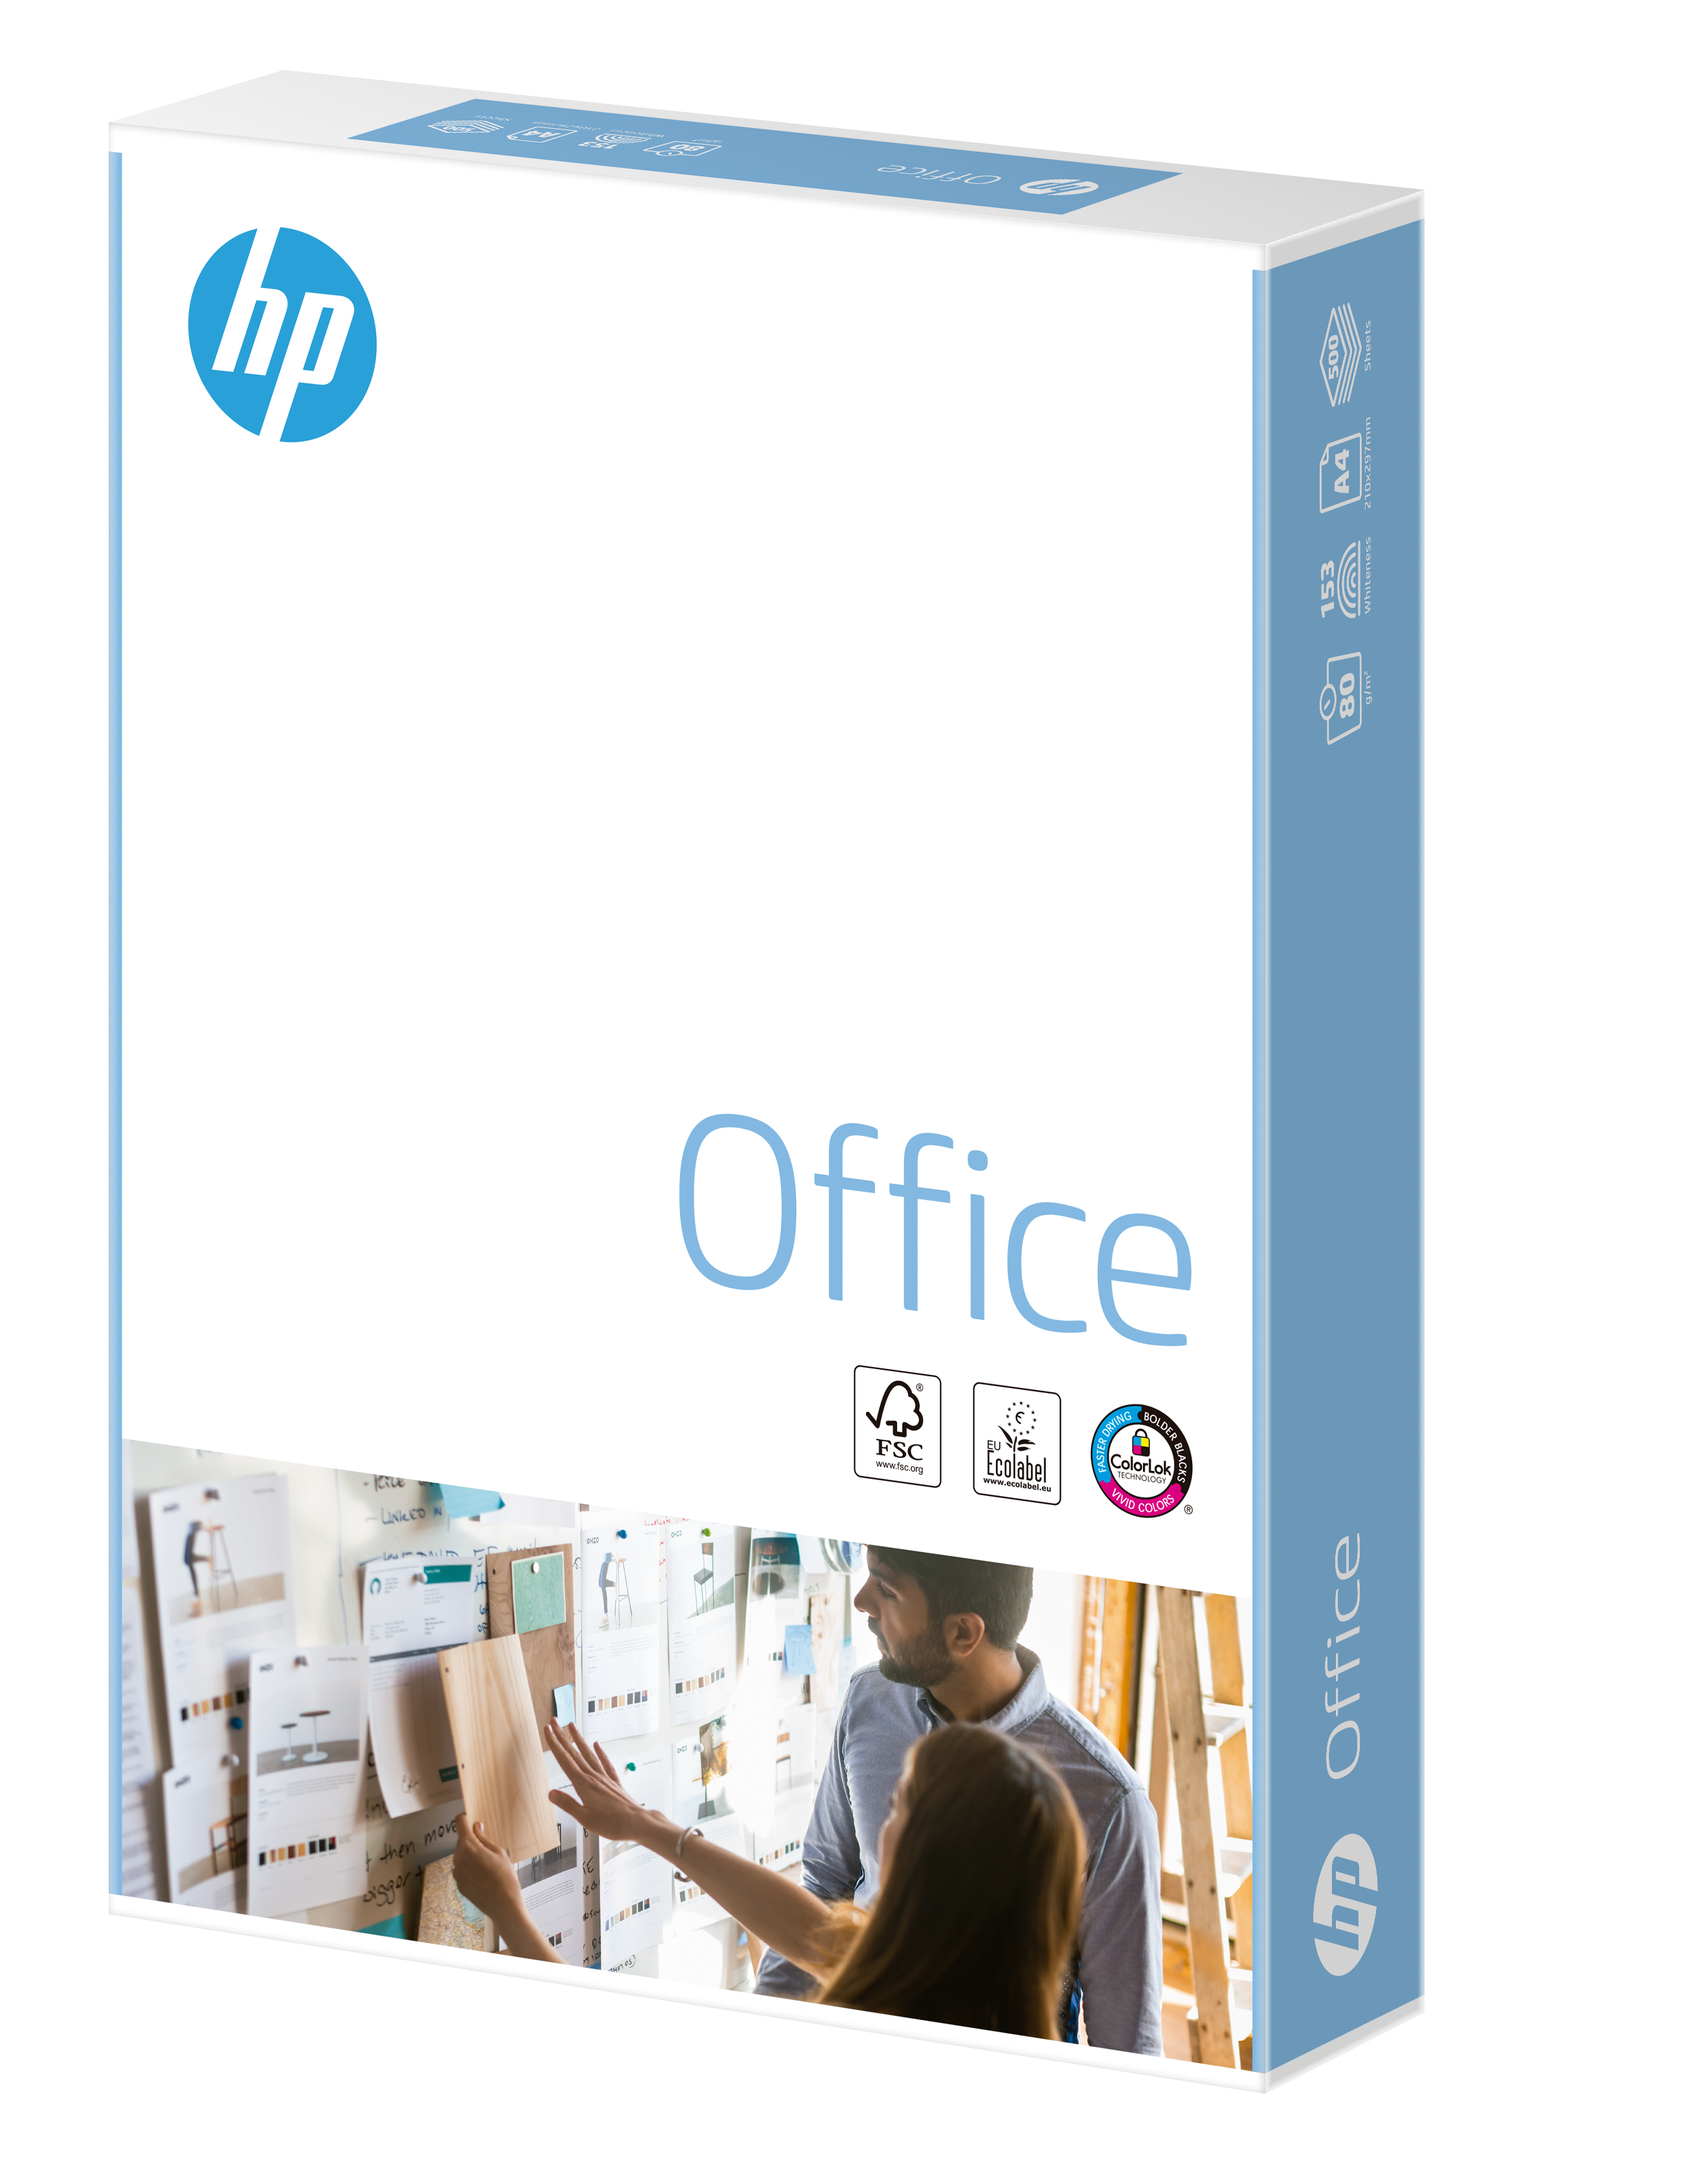 A4 HP Office Paper A4 80gsm White (Box 5 Reams) CHP110